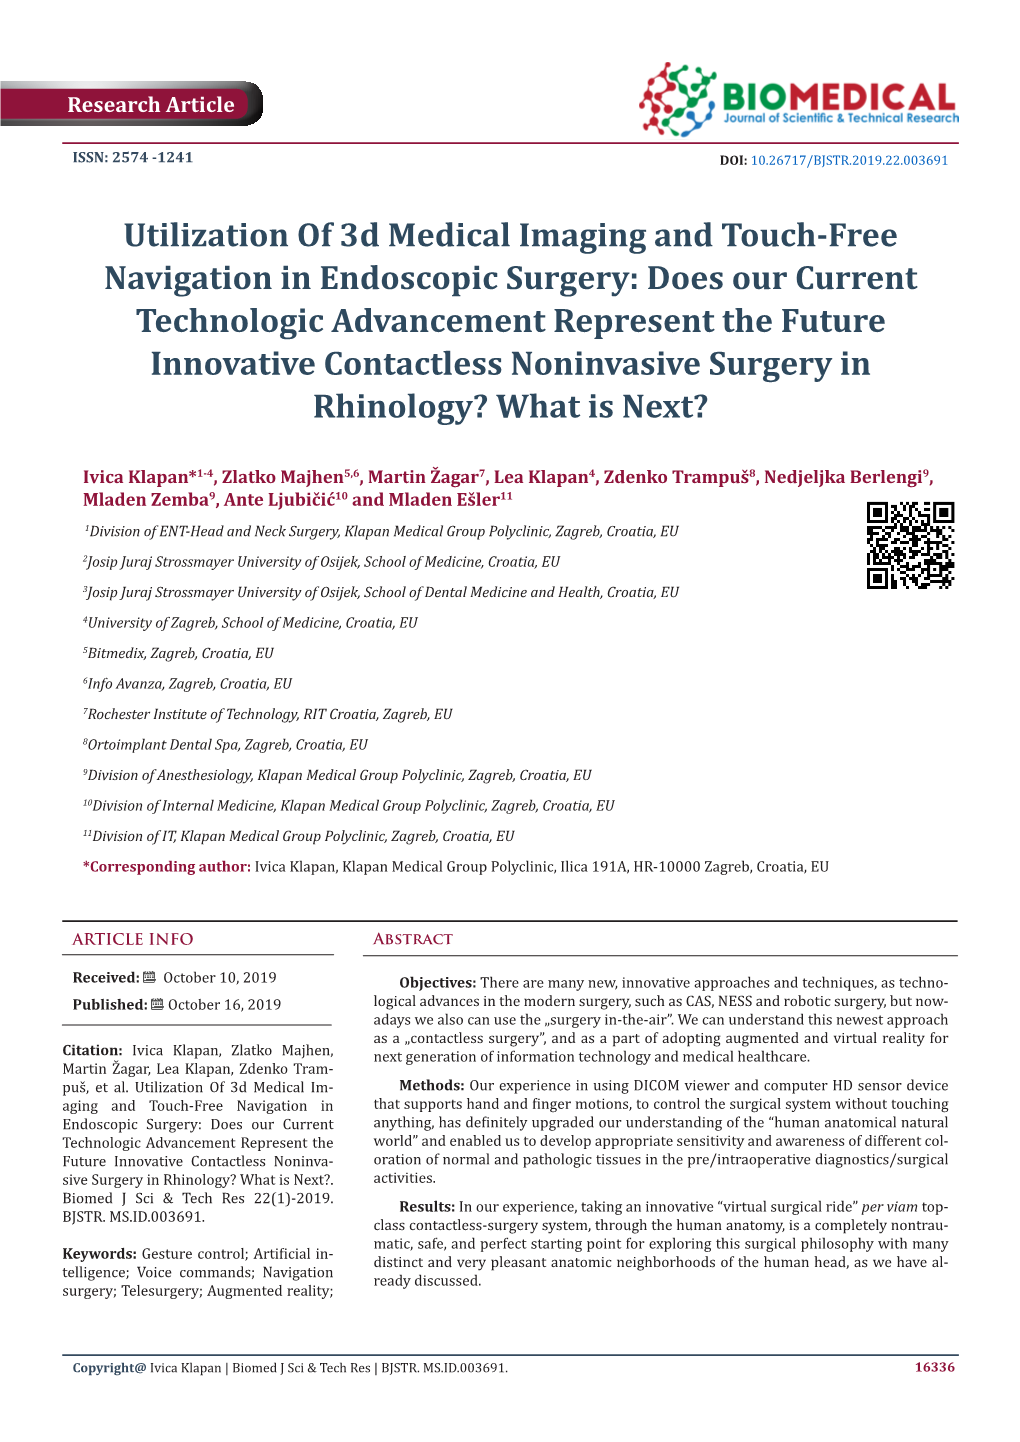 Utilization of 3D Medical Imaging and Touch-Free Navigation In